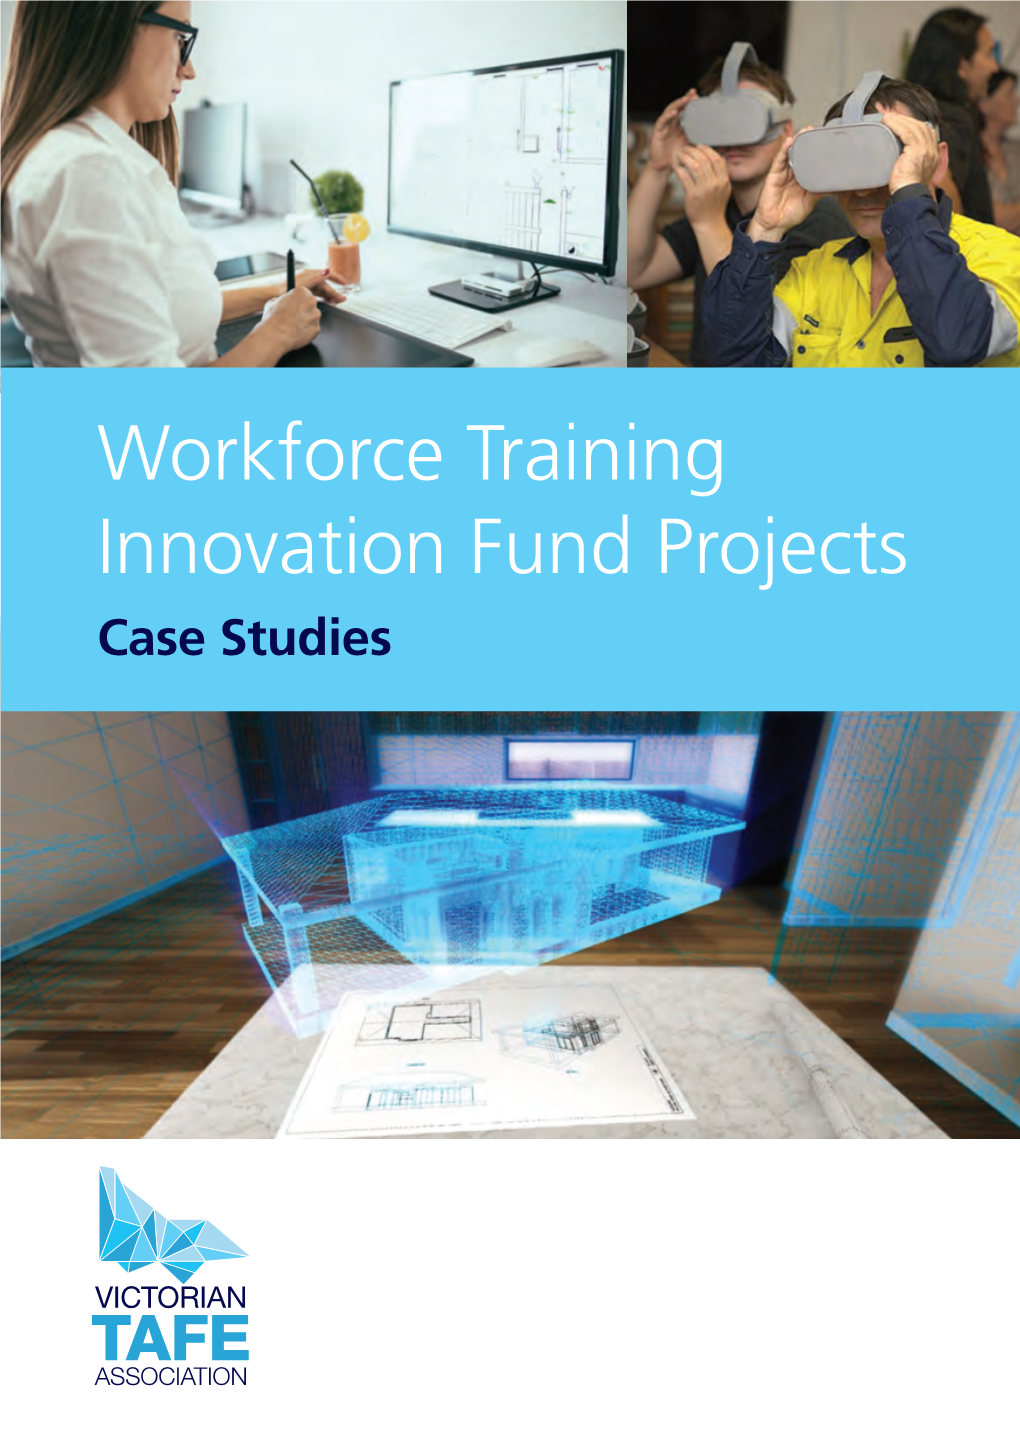 Workforce Training Innovation Fund Projects Case Studies Introduction